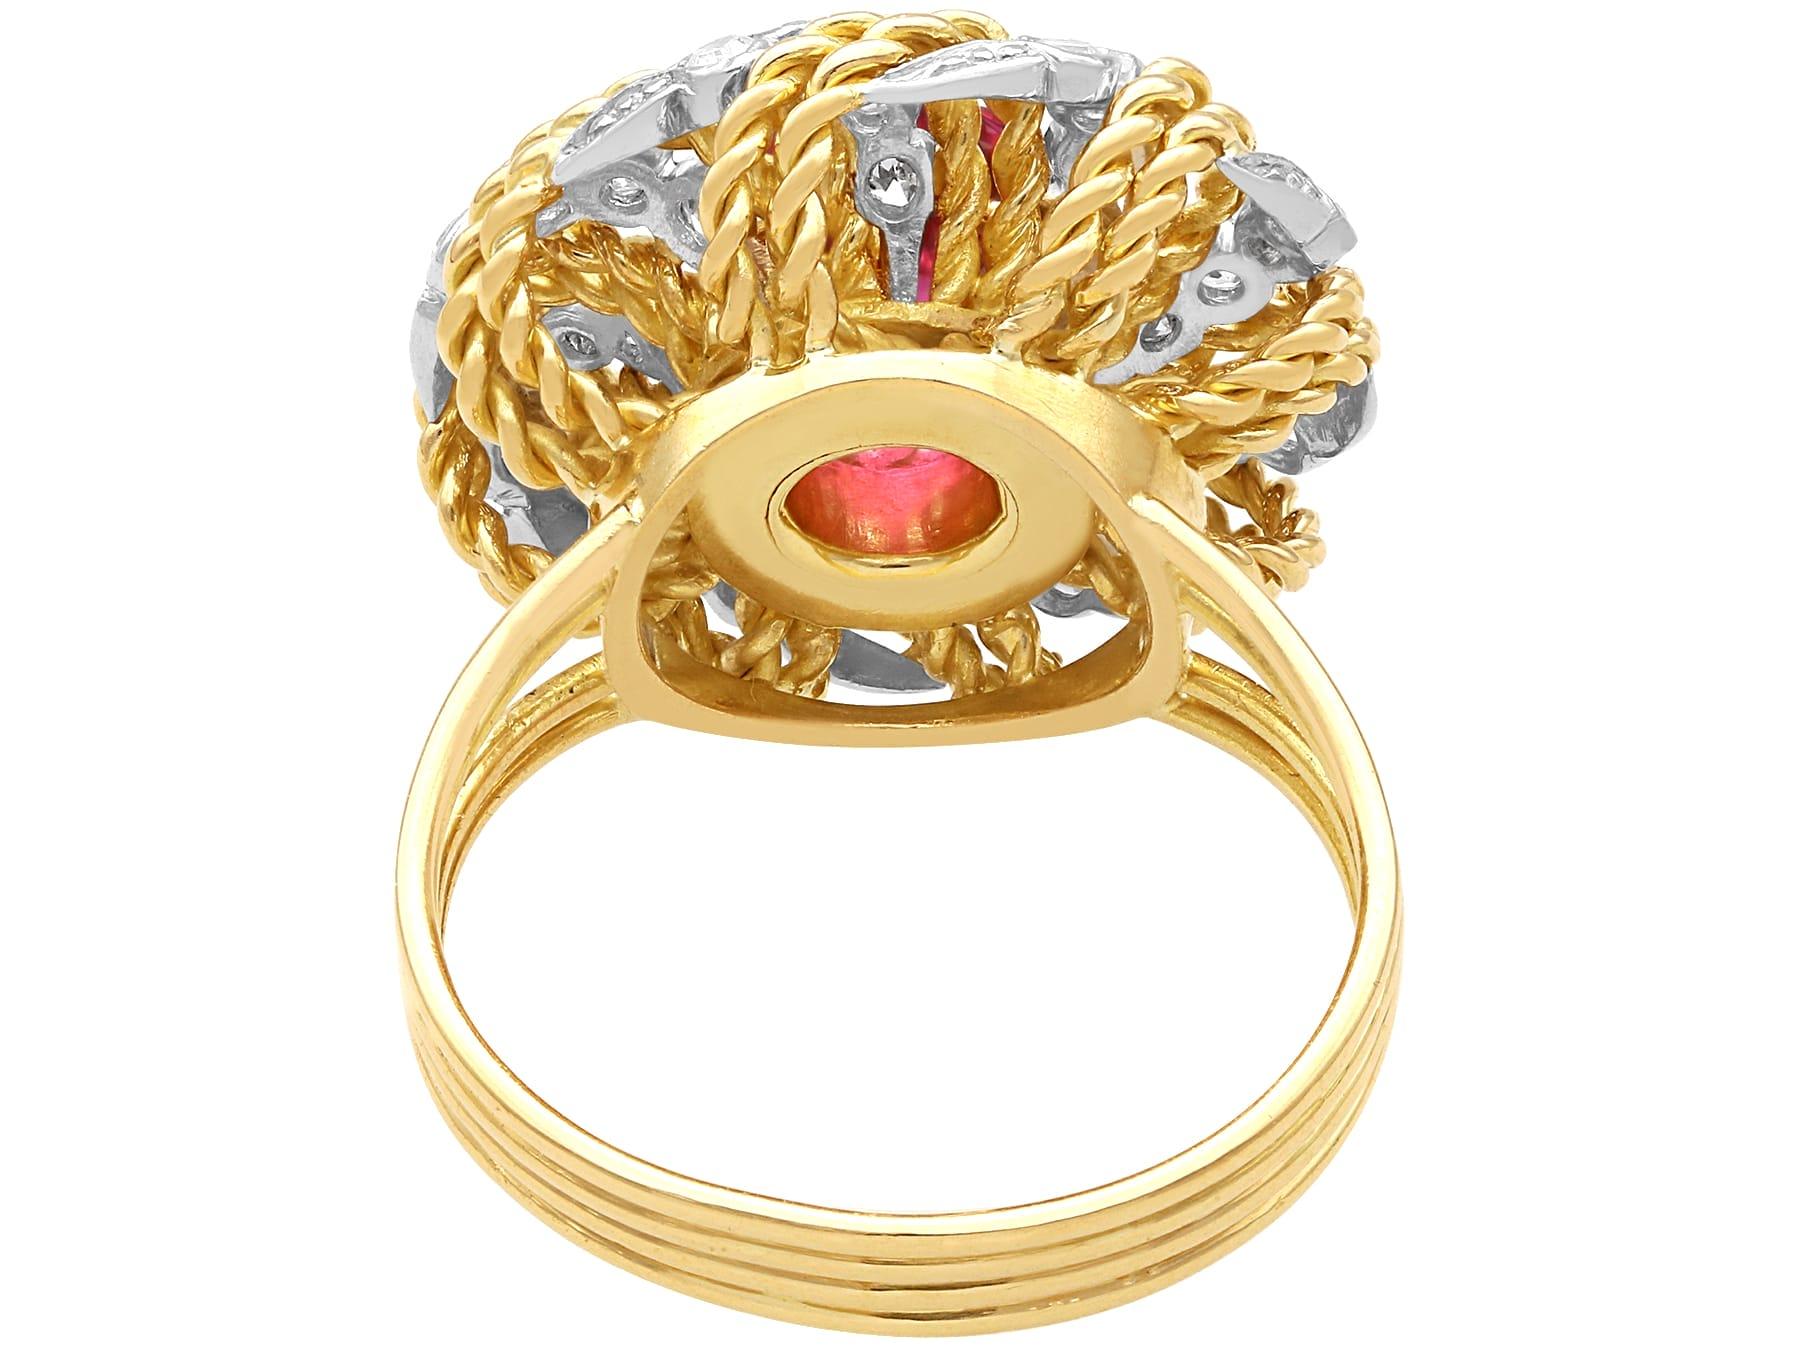 Vintage 3.75 Carat Pink Tourmaline and 0.96 Carat Diamond Yellow Gold Dress Ring In Excellent Condition For Sale In Jesmond, Newcastle Upon Tyne